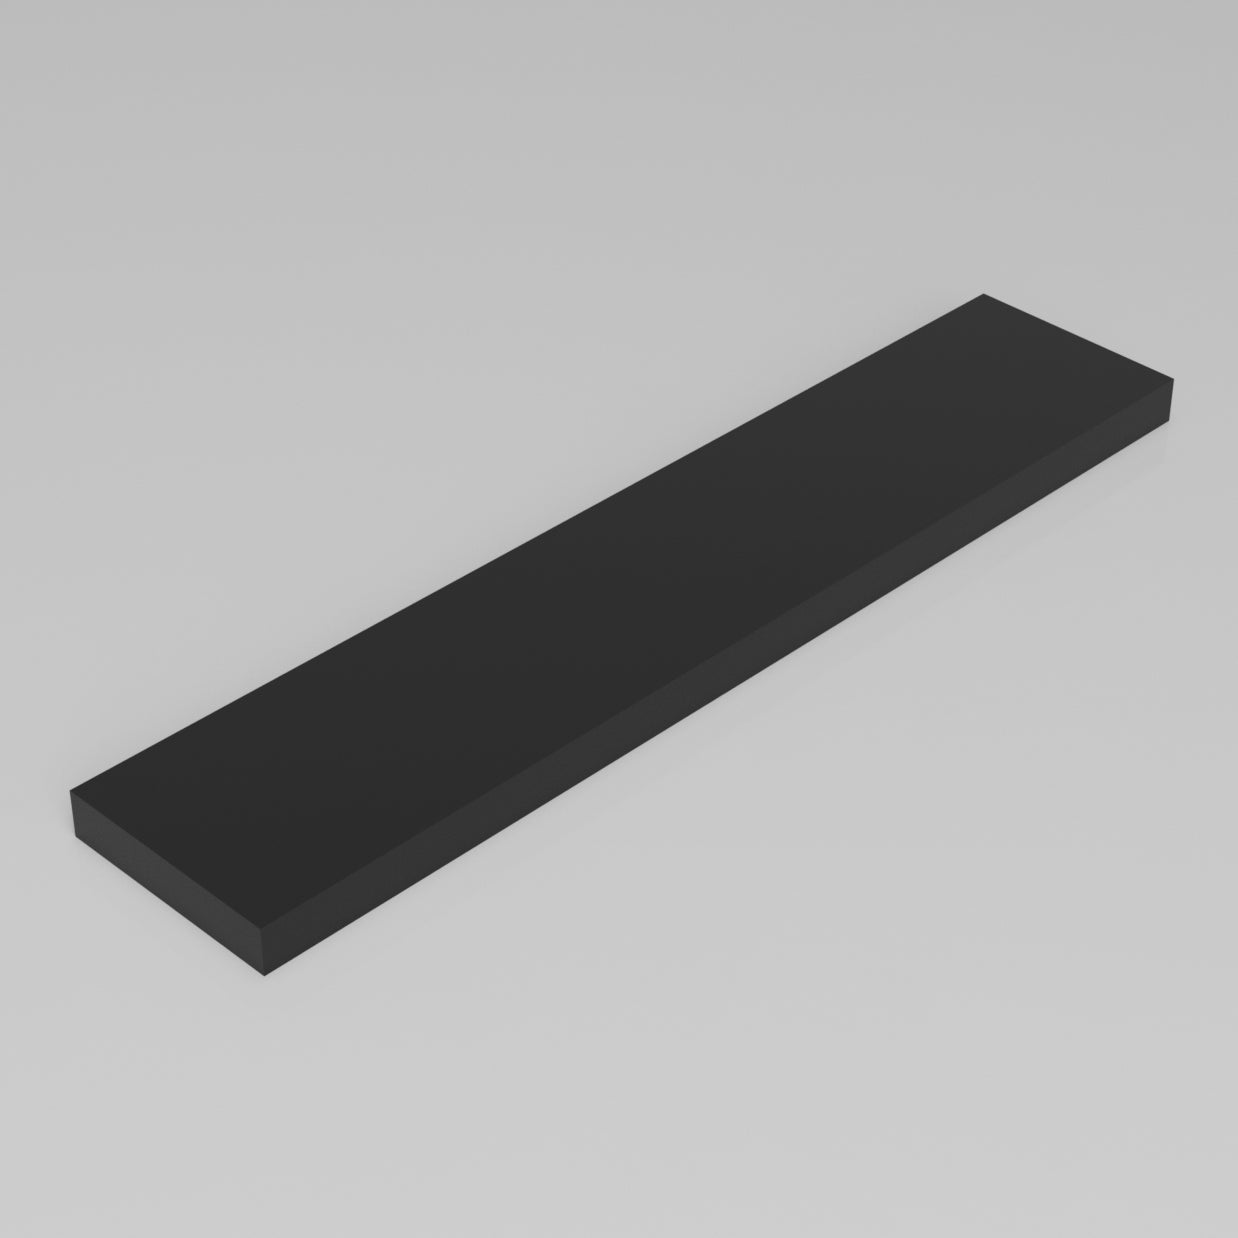 Machinable Wax Rectangular Block Front View 1 Inch by 5 Inch by 24 Inch